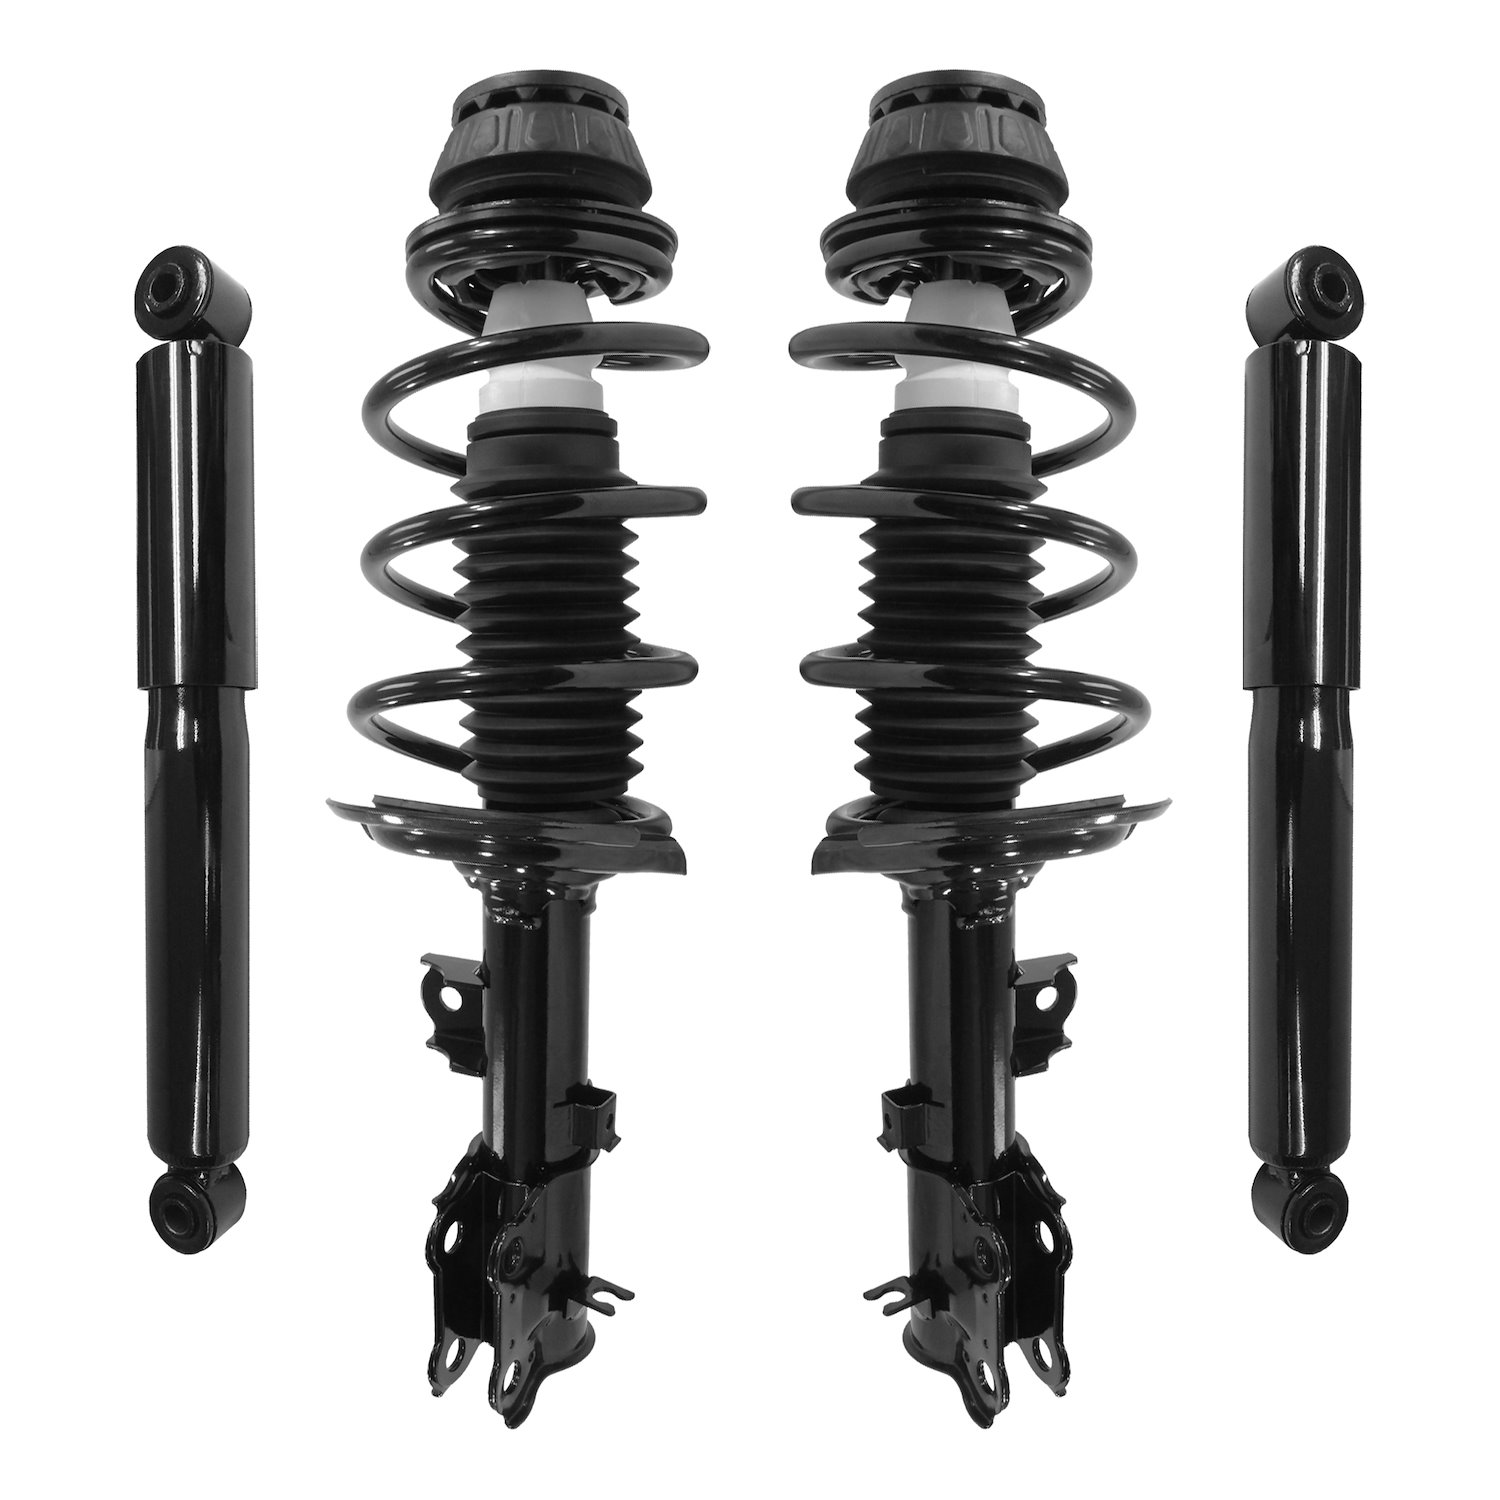 4-11185-259180-001 Front & Rear Suspension Strut & Coil Spring Assembly Fits Select Kia Rio